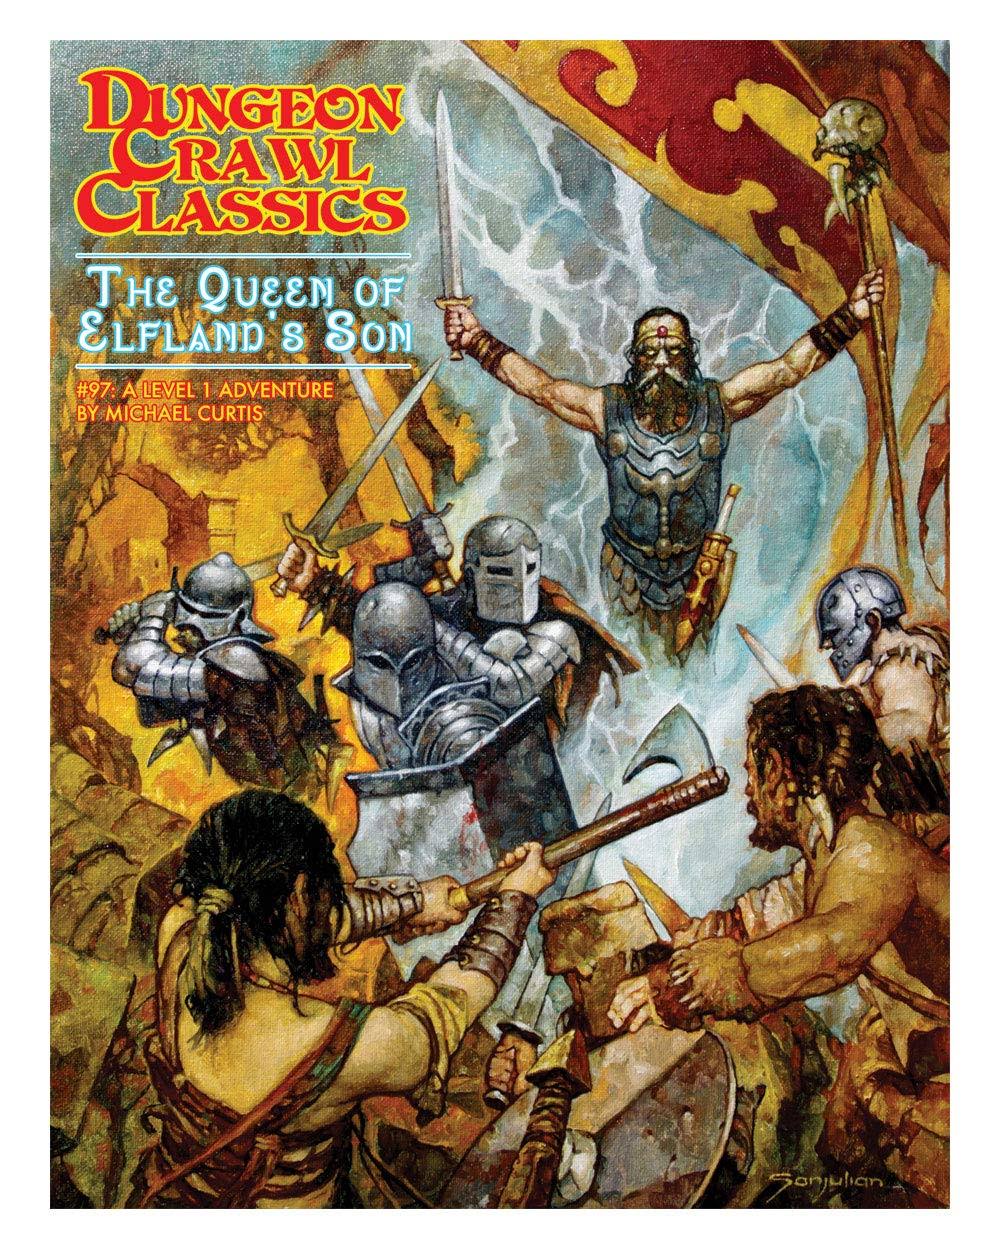 Dungeon Crawl Classics #97 The Queen of Elflands Son